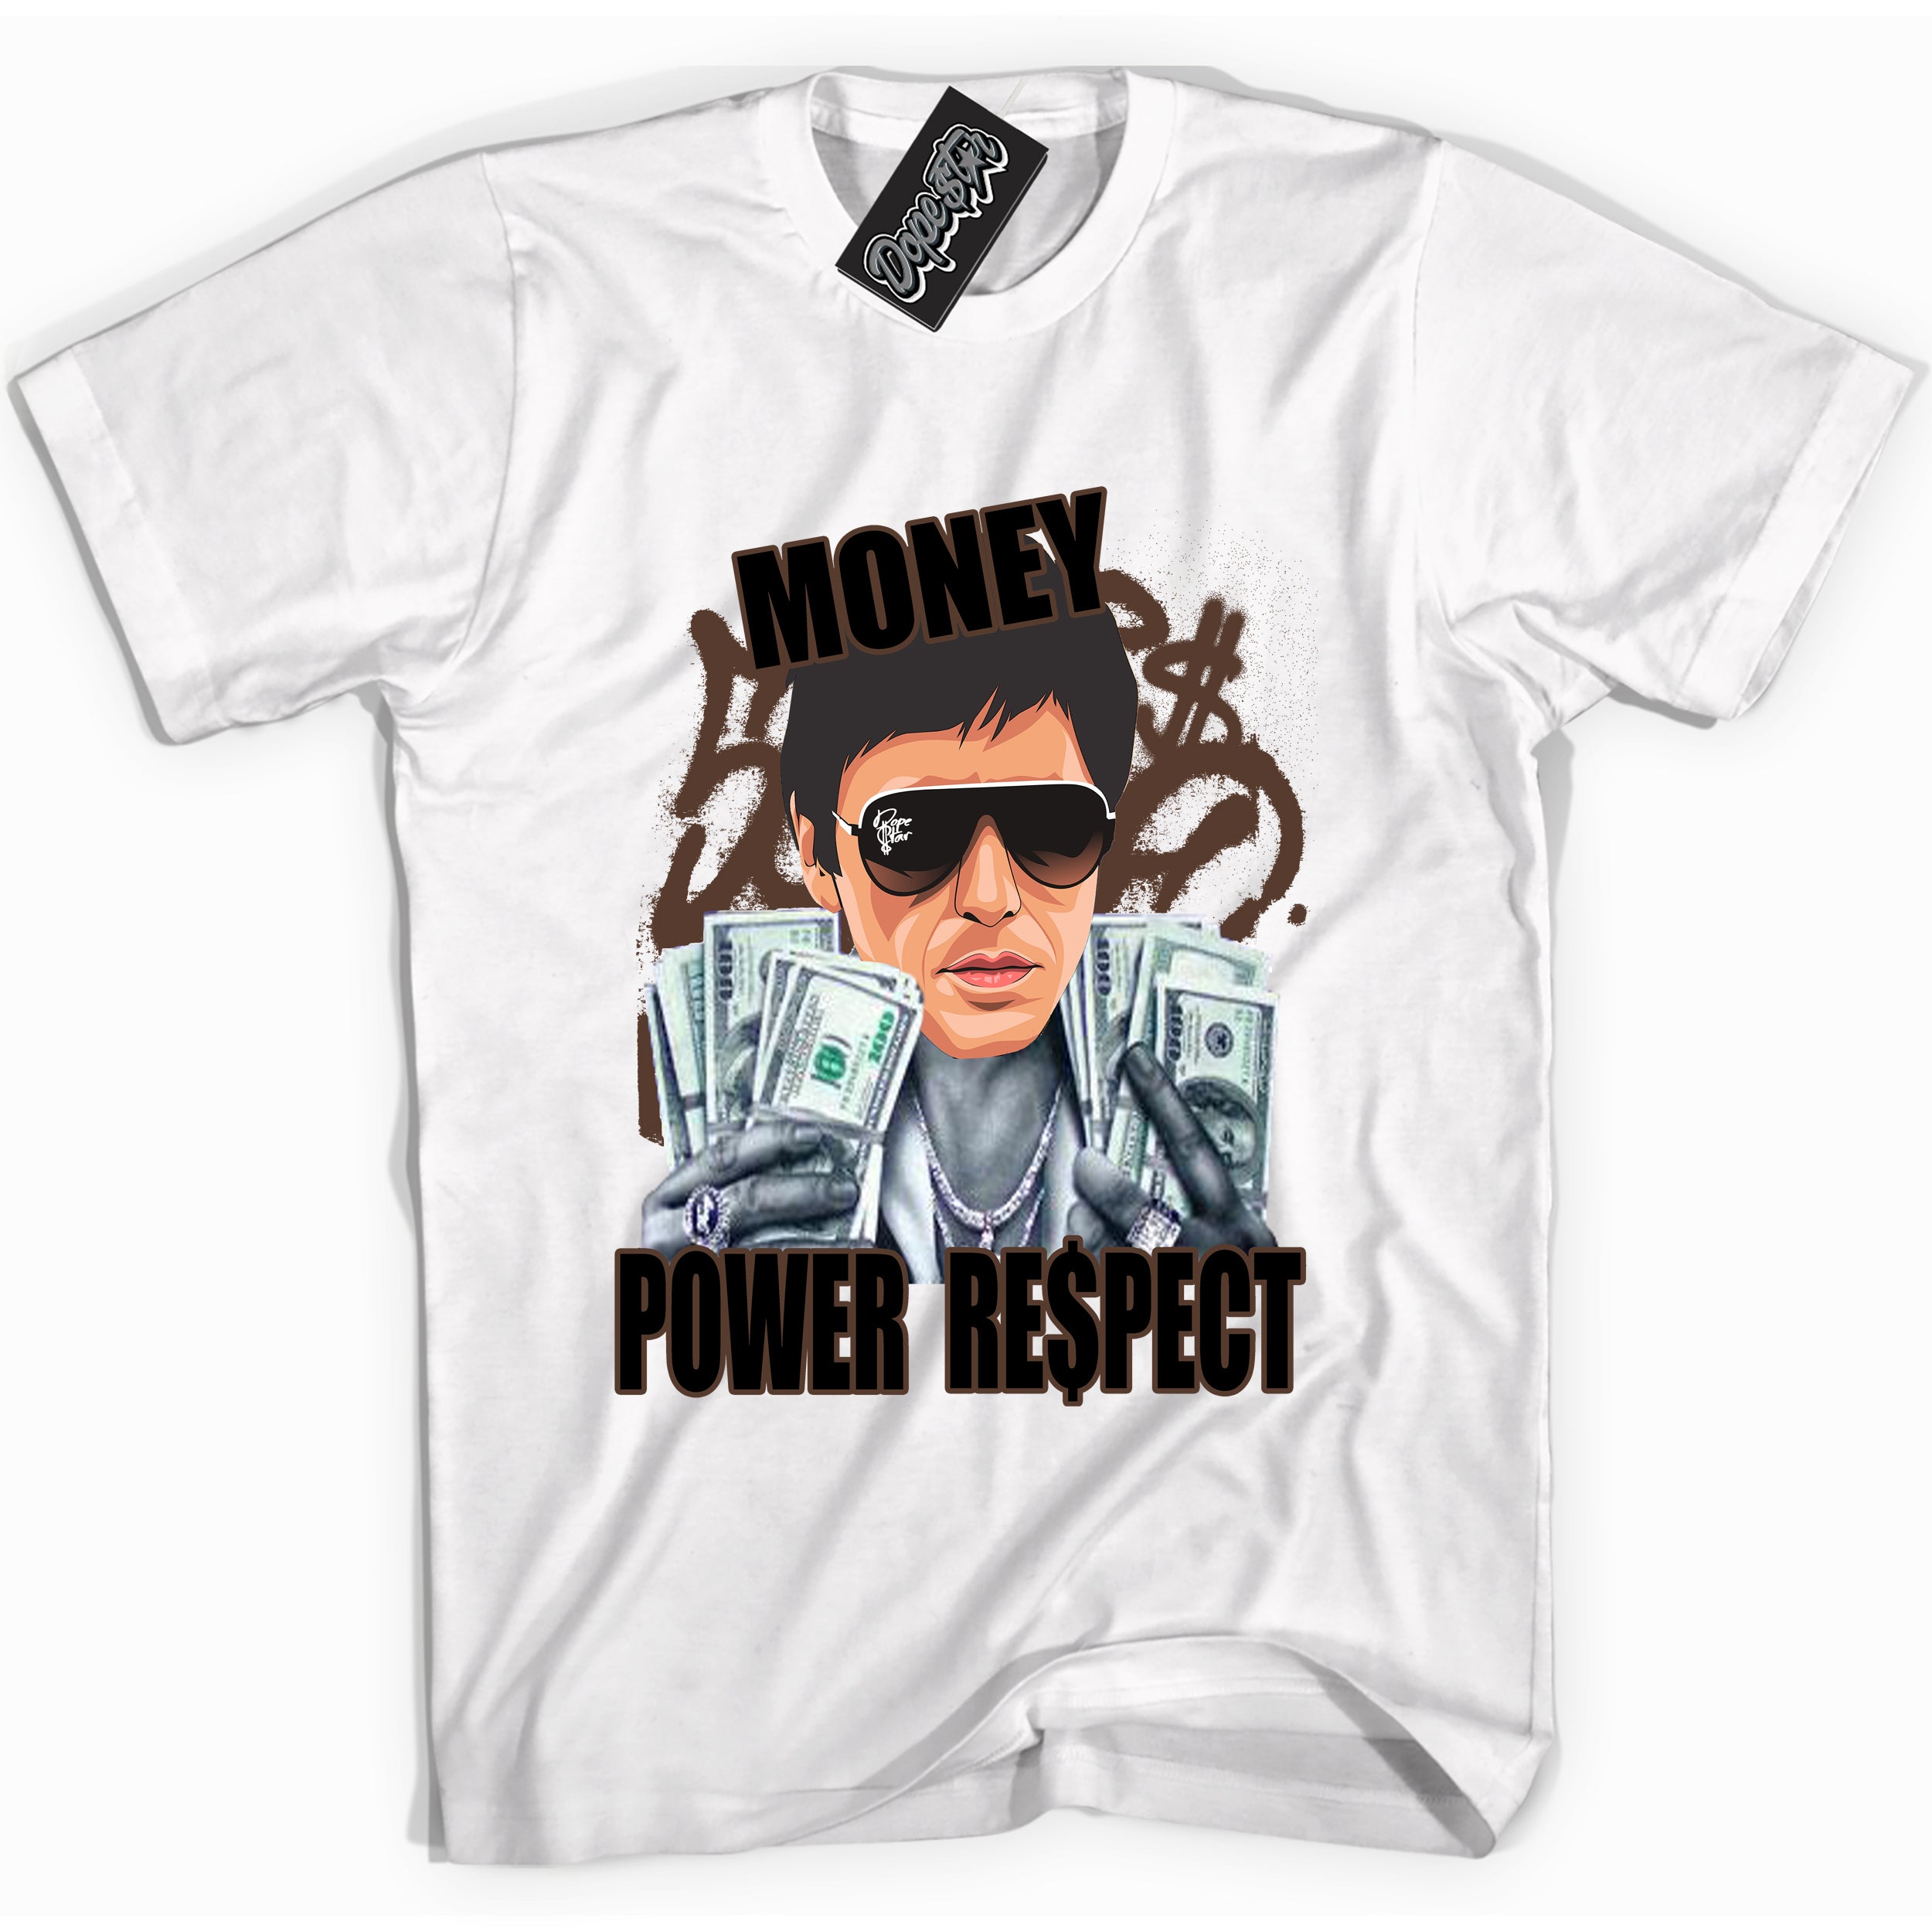 Cool White graphic tee with “ Tony Montana ” design, that perfectly matches Palomino 1s sneakers 